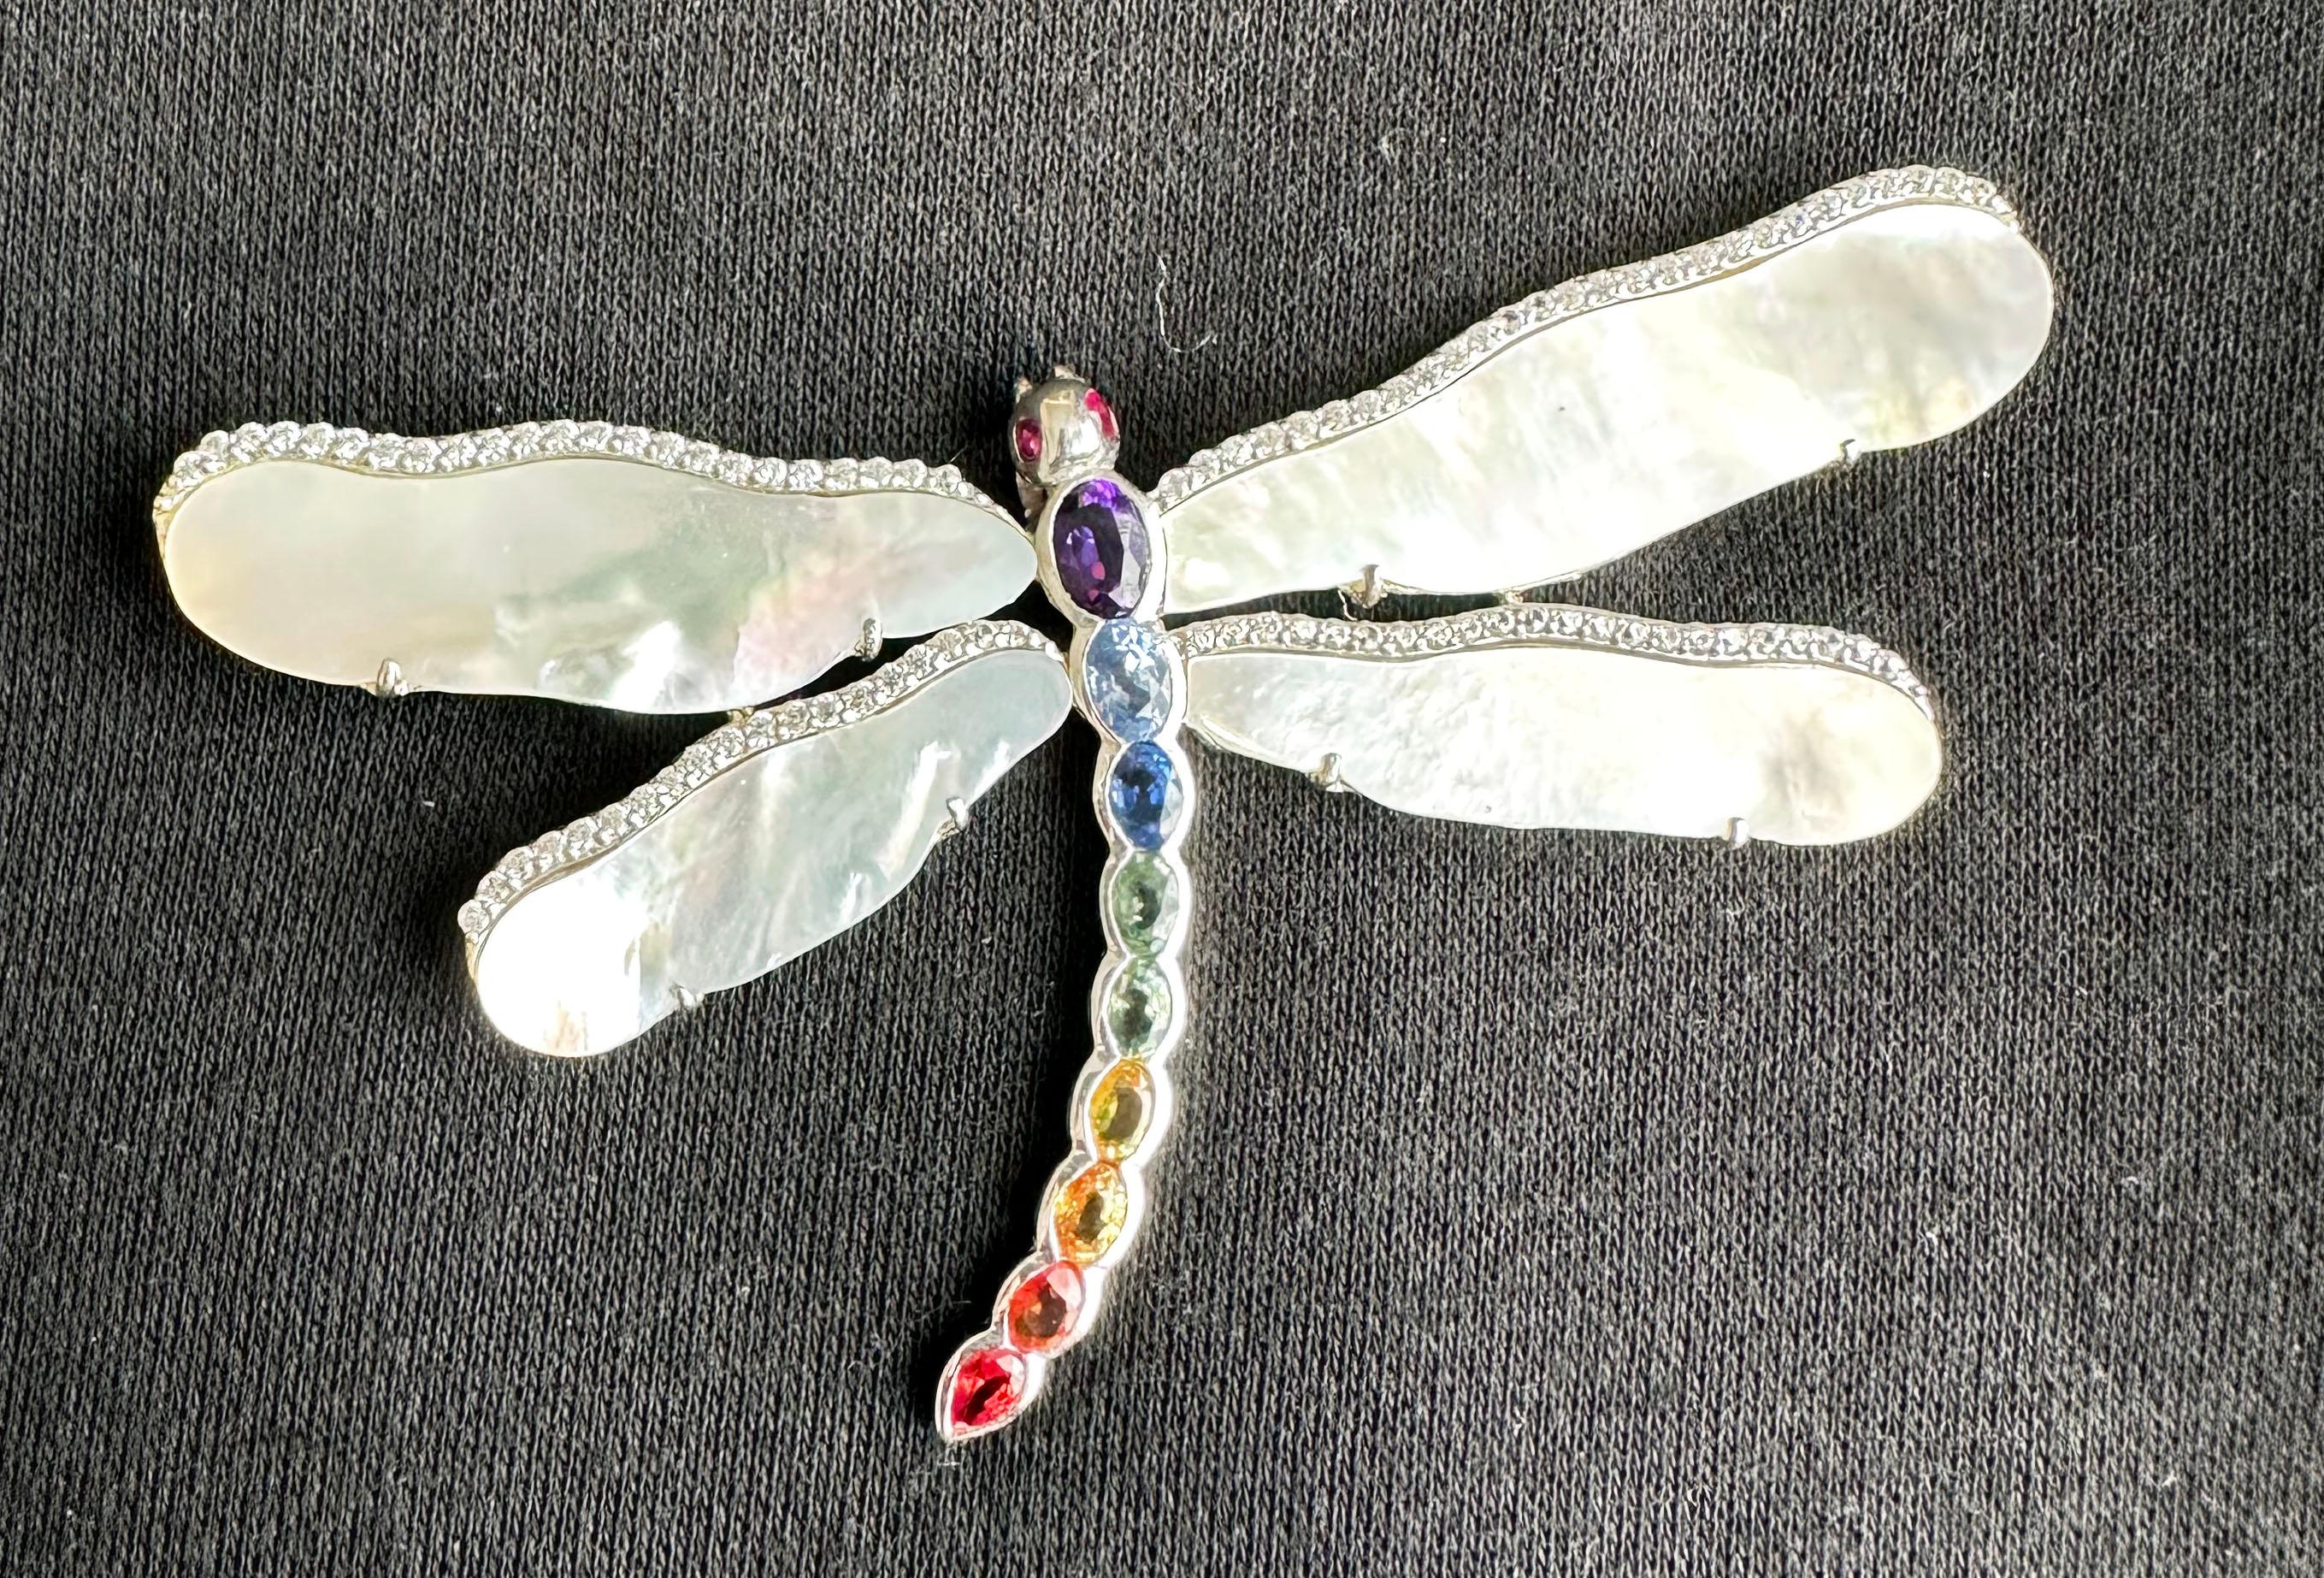 This one of a kind piece is convertible between a Brooch and a Pendant. It is set with Mother of Pearl Wings accented by tiny White Sapphires. The Body is set with a Rainbow Collection of Sapphires and an Amethyst and Ruby Eyes. The head has a bail